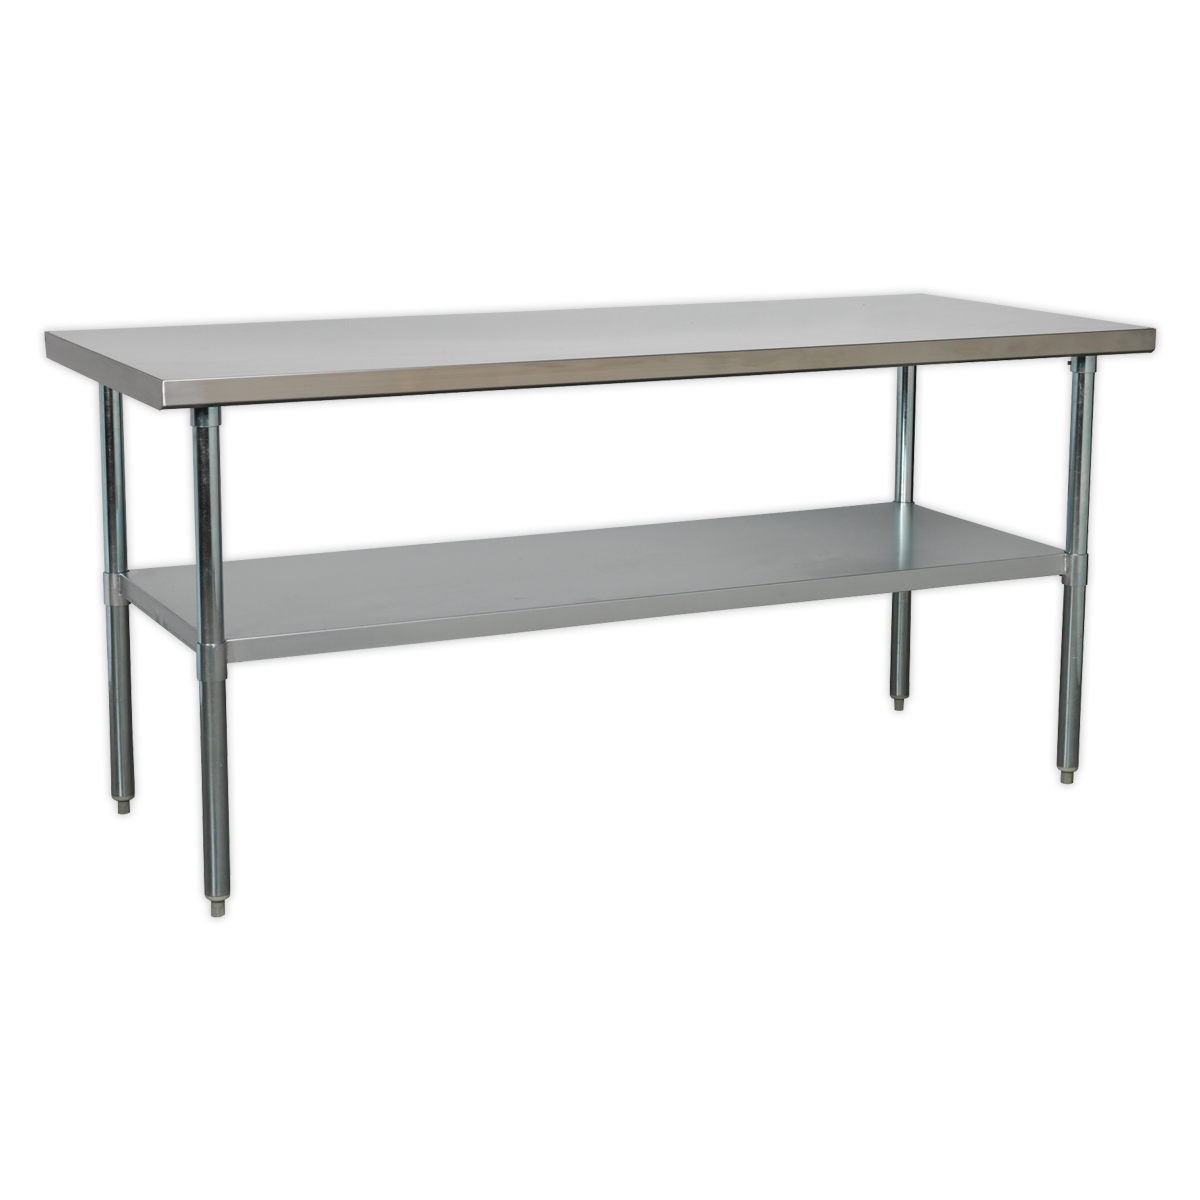 SEALEY - AP1872SS Stainless Steel Workbench 1.8m